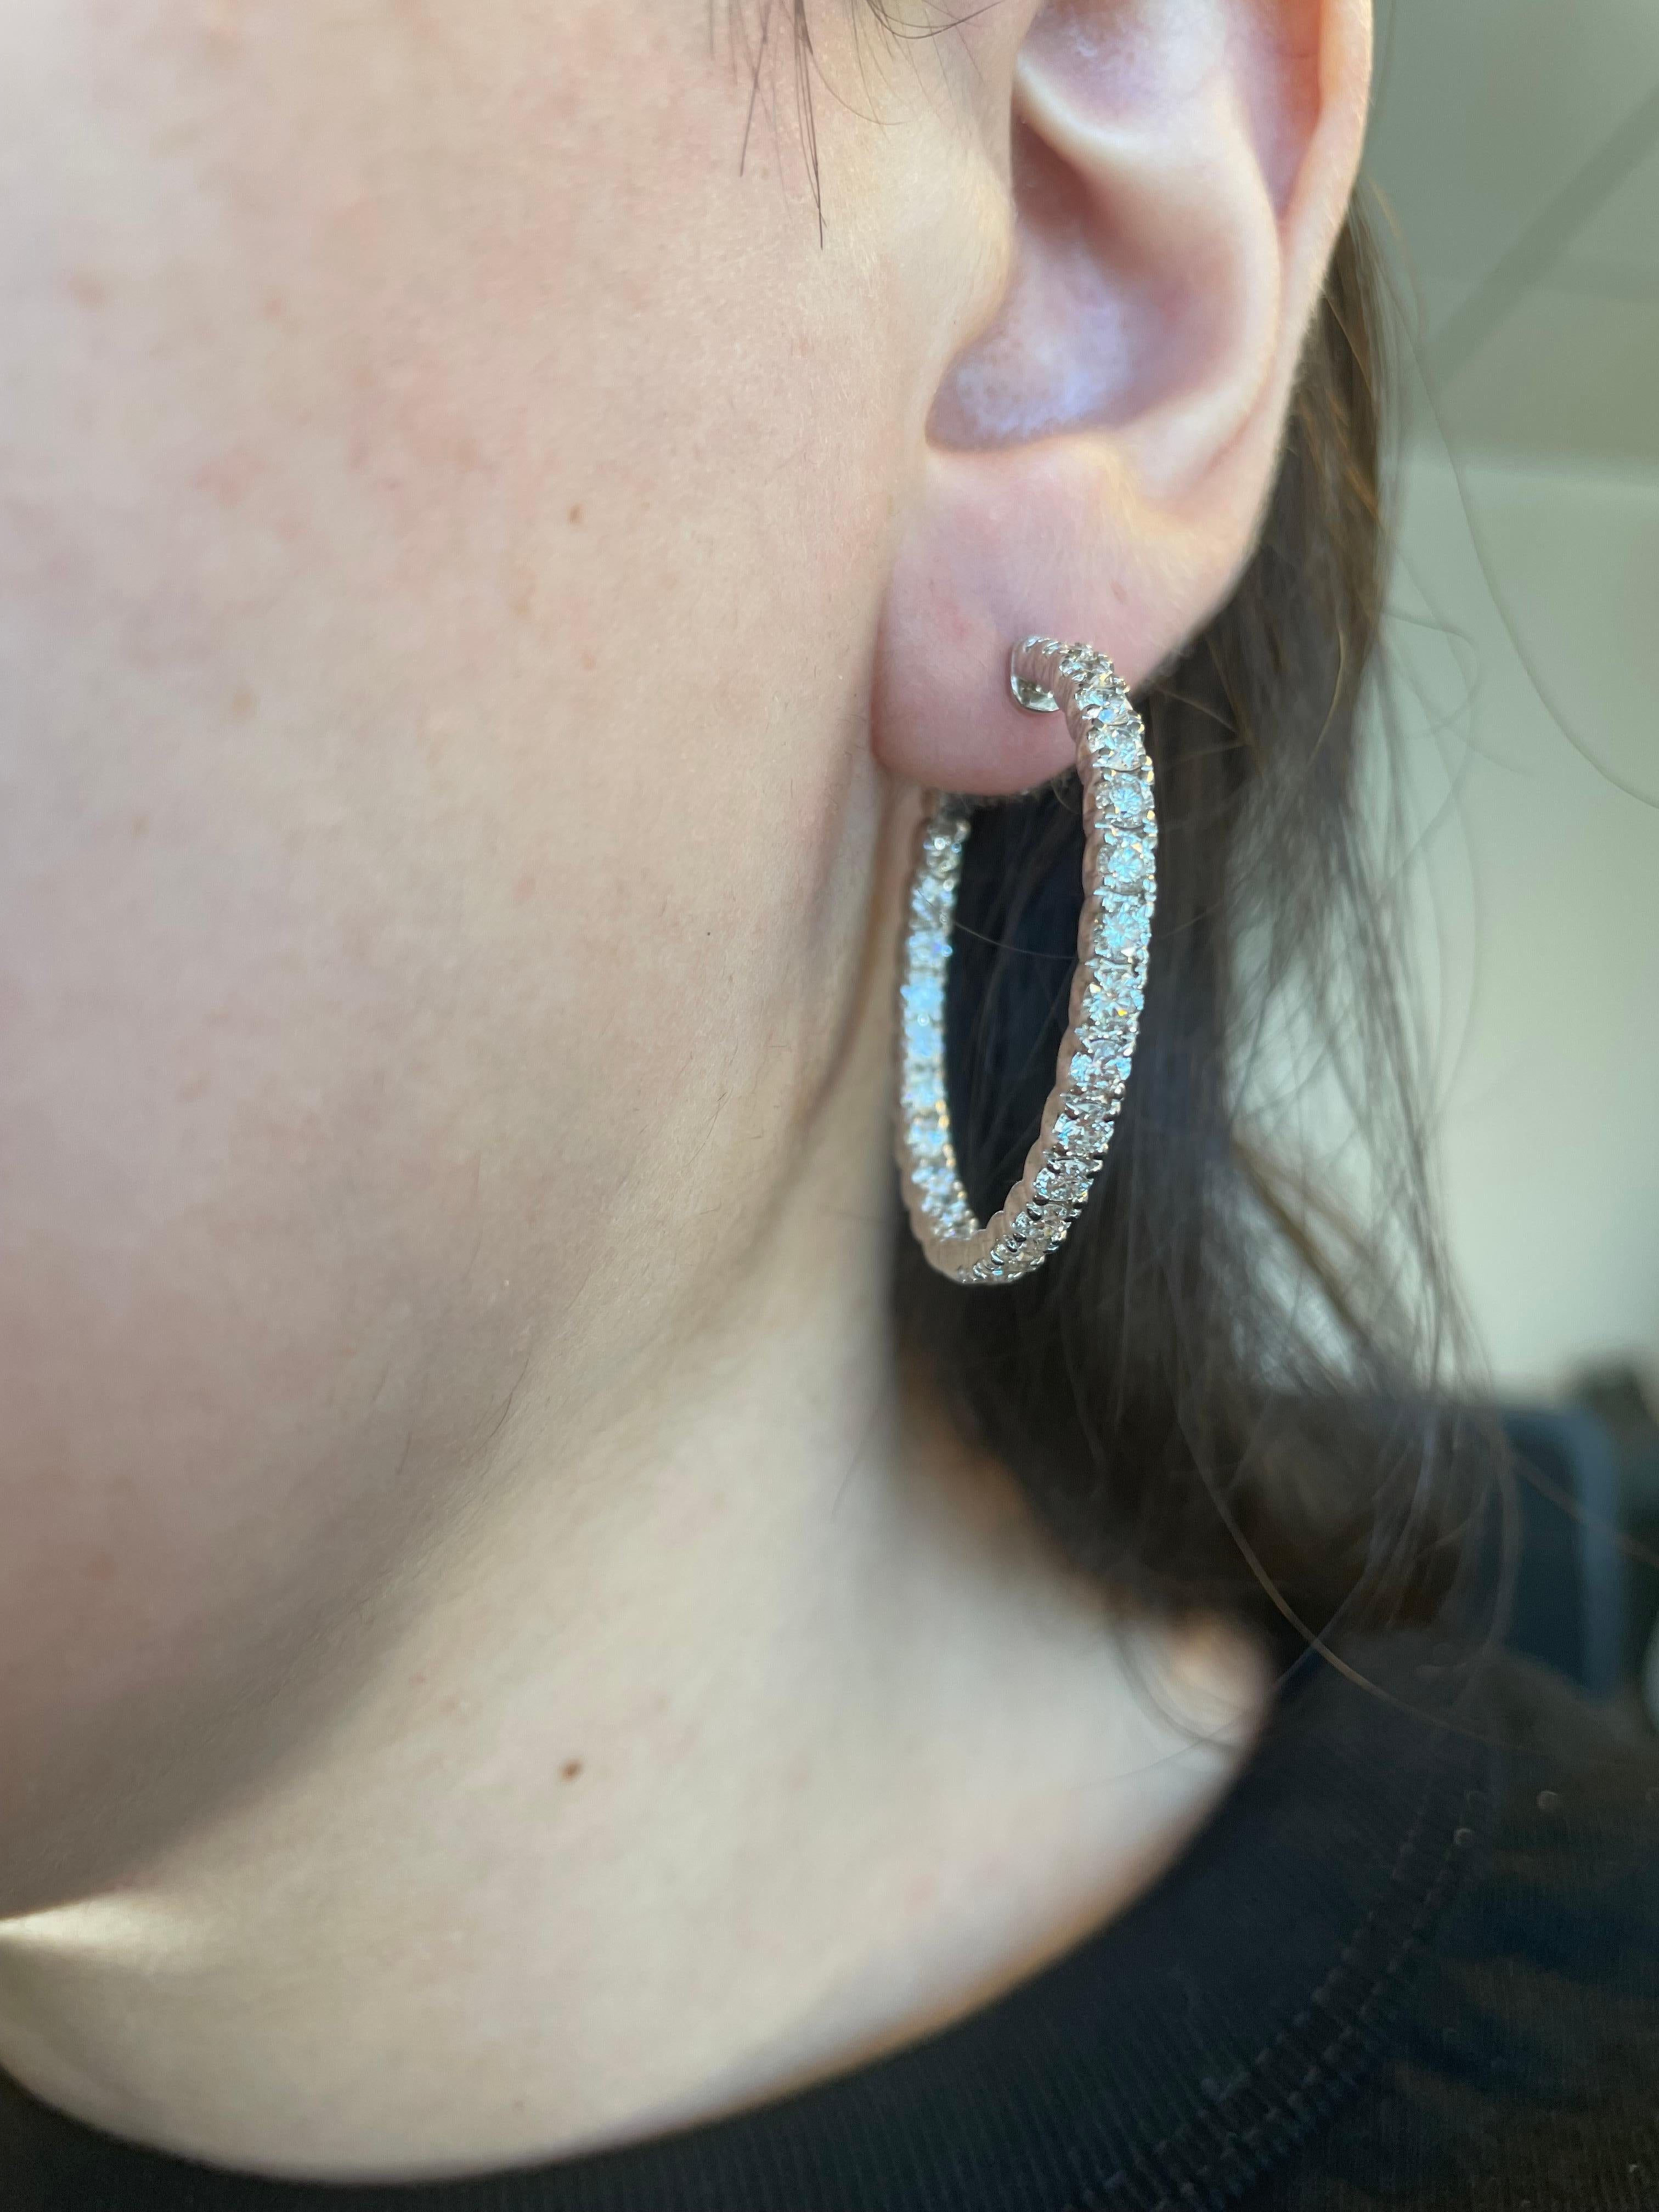 Classic round diamond hoop earrings. By Alexander Beverly Hills.
52 round brilliant diamonds, 4.24 carats total. Approximately G/H color and SI clarity. Four prong set, 14k white gold. 
Accommodated with an up-to-date appraisal by a GIA G.G. once